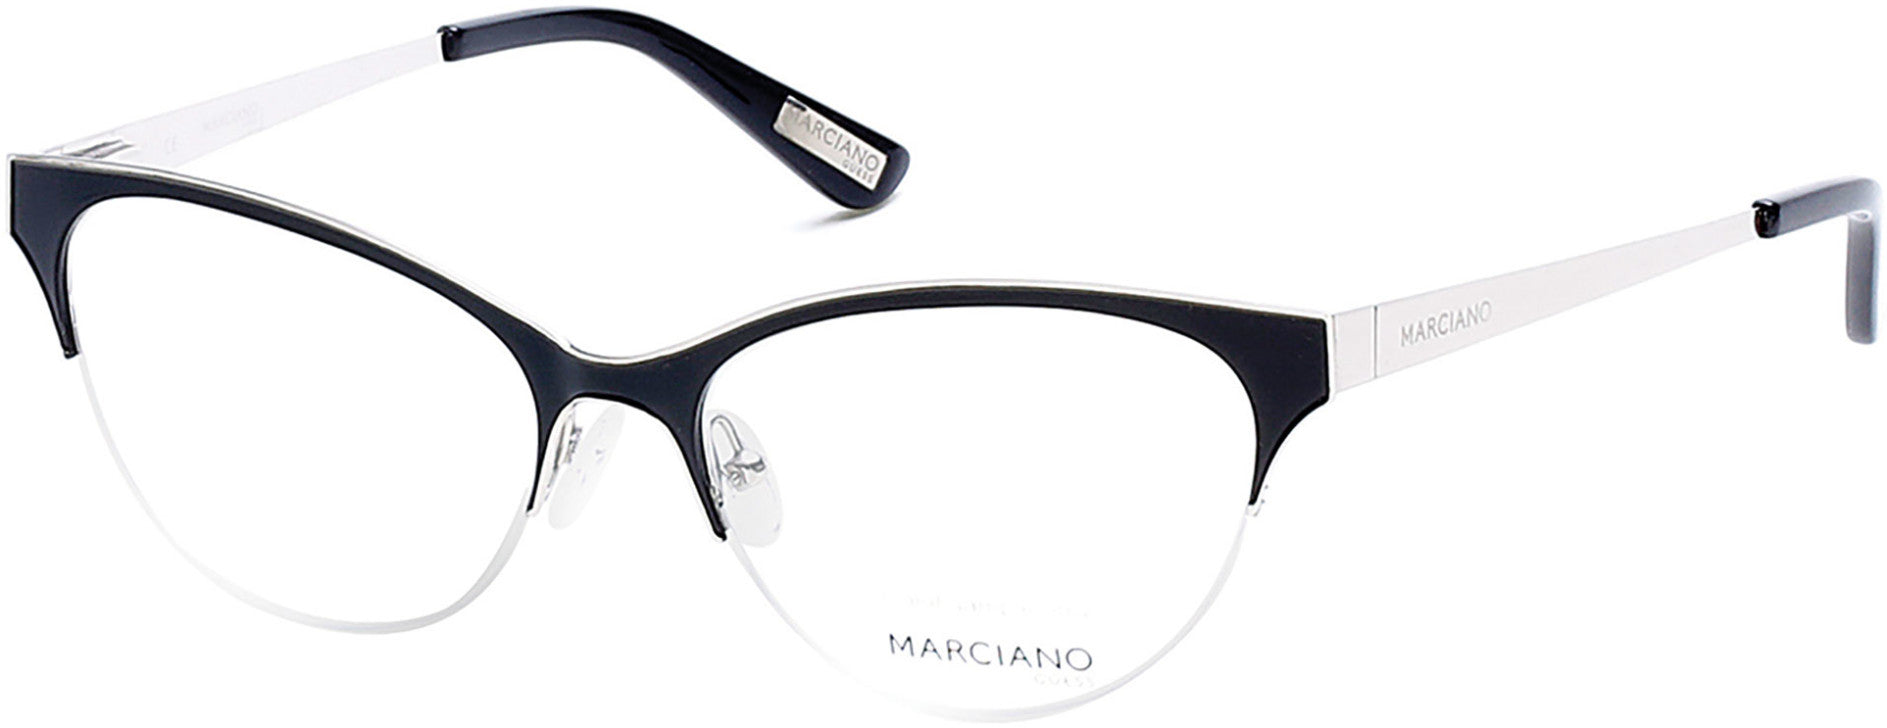 Guess By Marciano GM0277 Eyeglasses 001-001 - Shiny Black